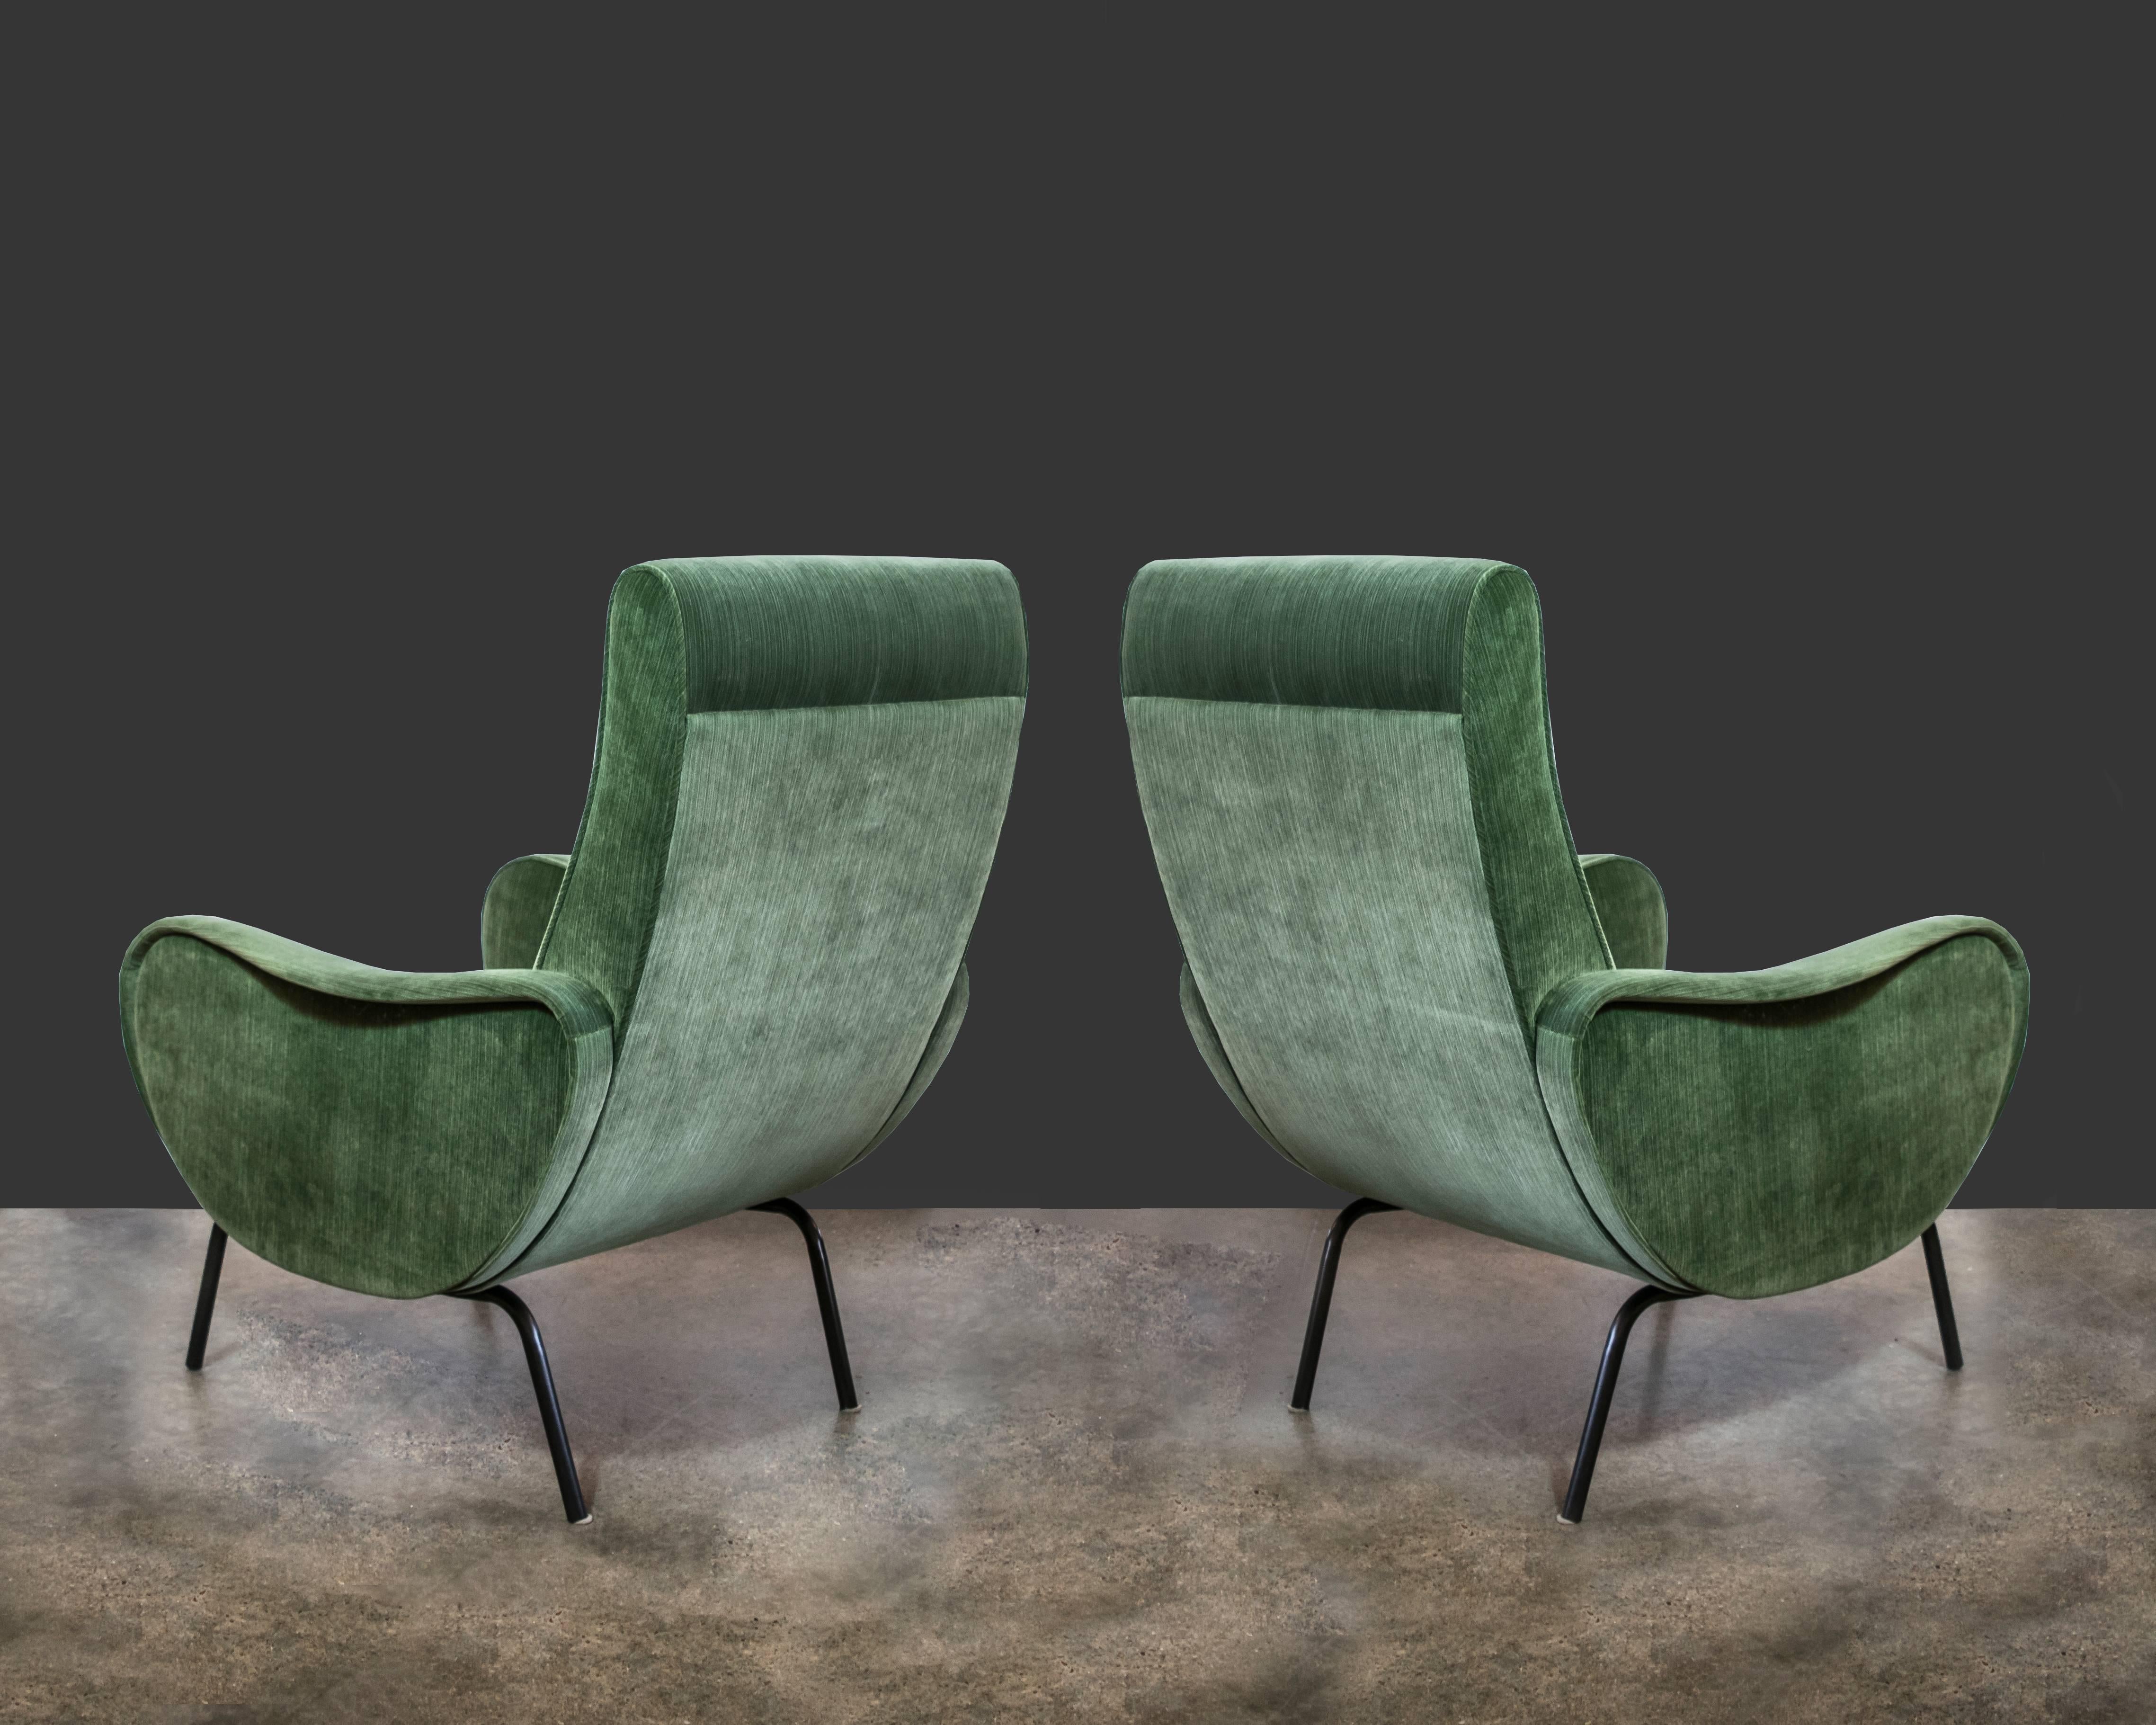 Gorgeous midcentury Italian Arflex chairs with wrought iron bases, recently recovered in striated green velvet.